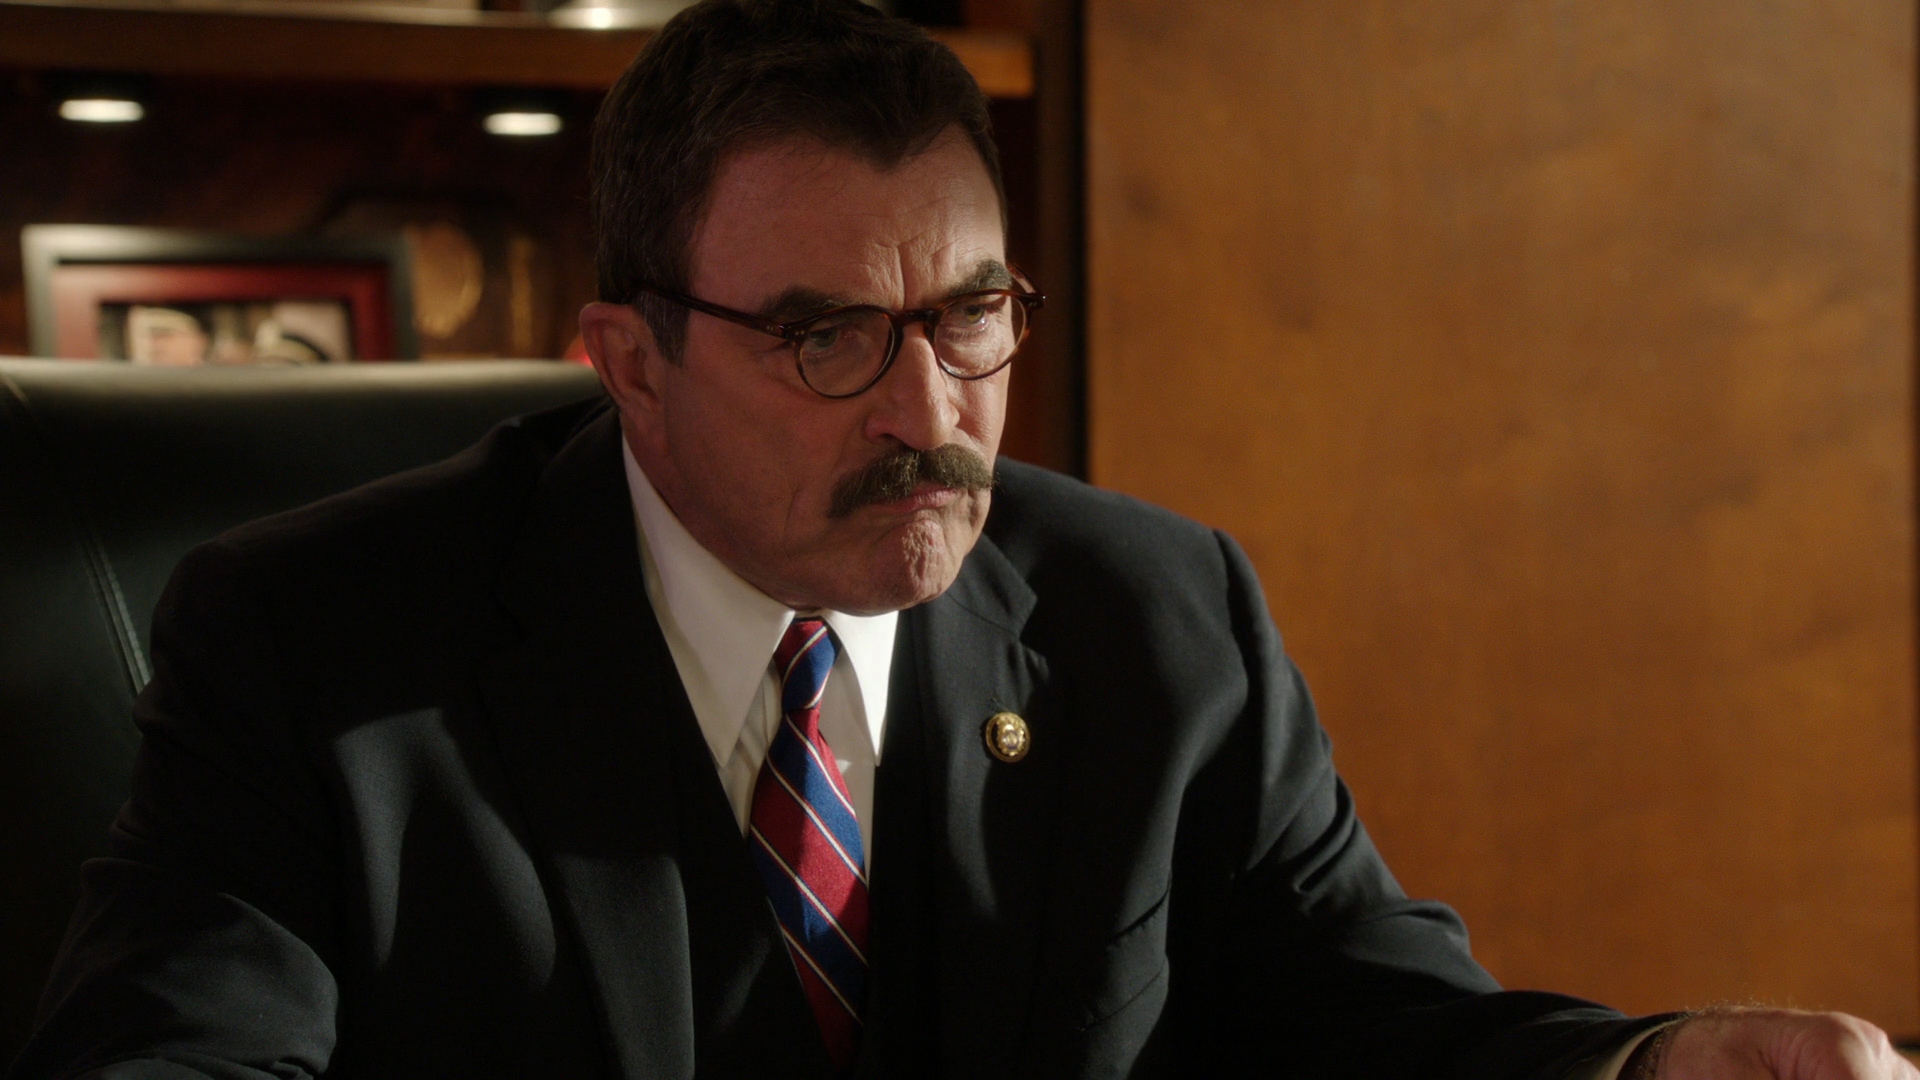 Watch Blue Bloods Season 2 Episode 10: Whistle Blower - Full show on ...